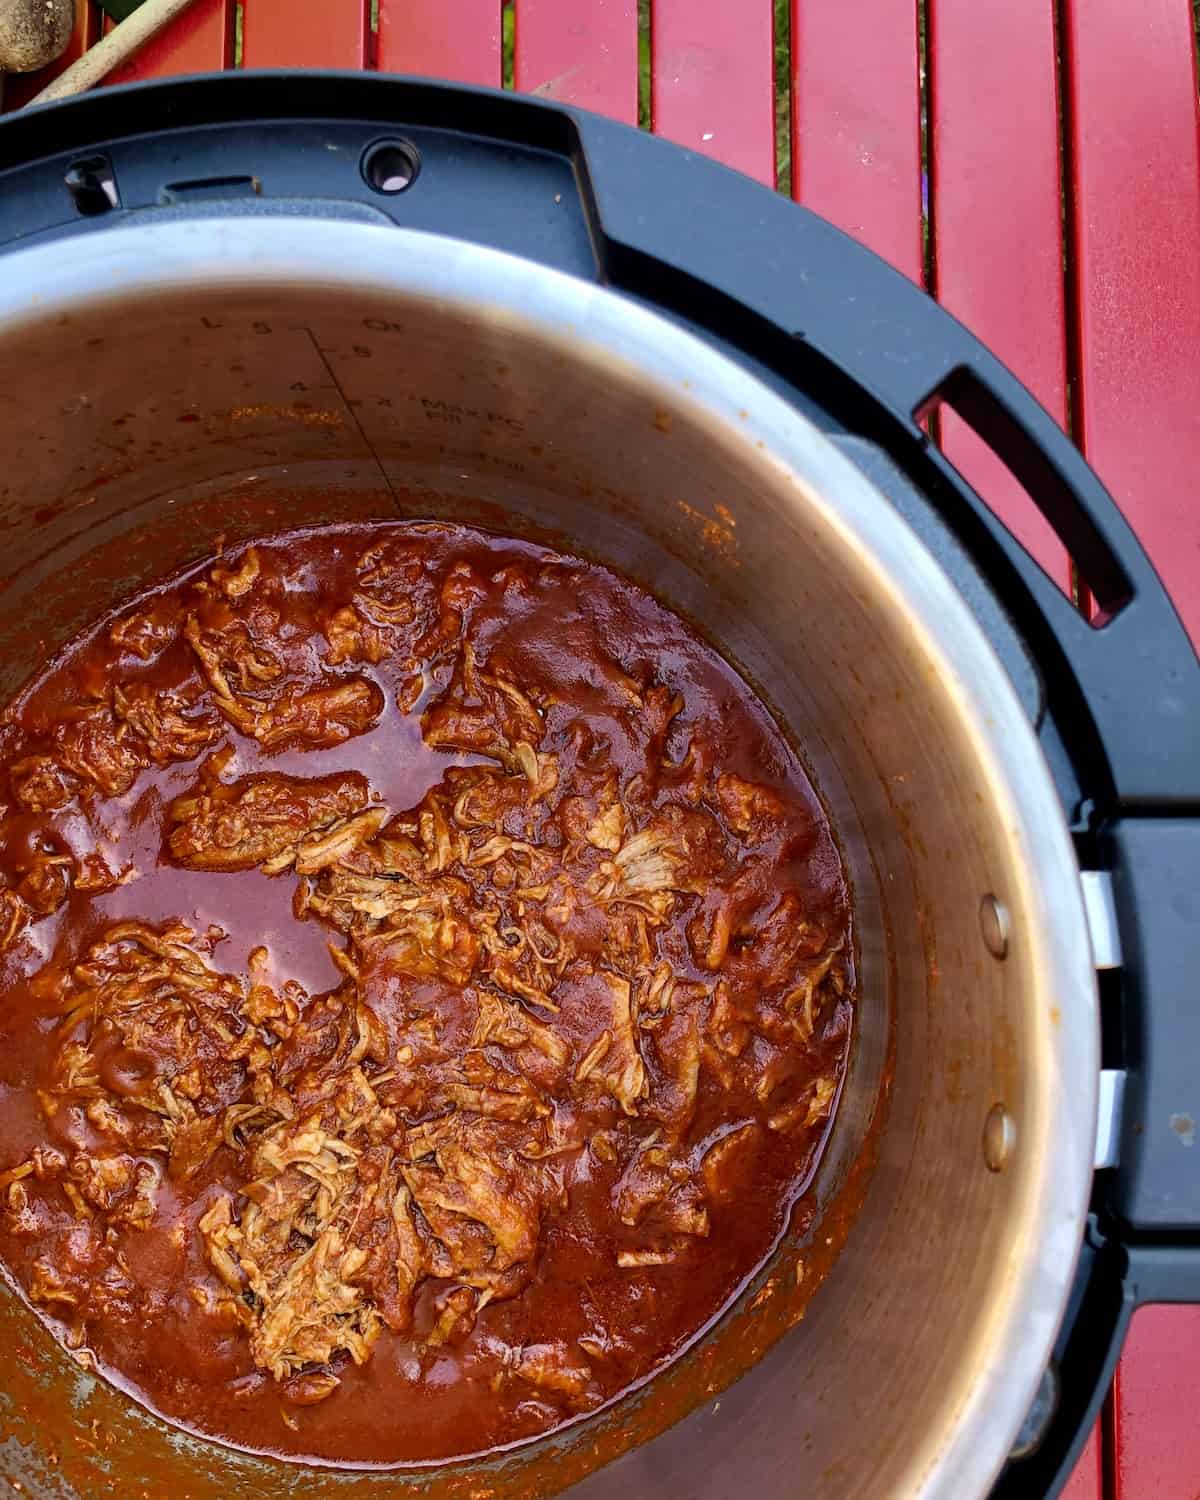 https://www.feistytapas.com/wp-content/uploads/2020/06/Cooked-Easy-Instant-Pot-BBQ-Pulled-Pork-recipe-by-Feisty-Tapas-in-the-Duo-Evo-Plus-with-handles.jpg